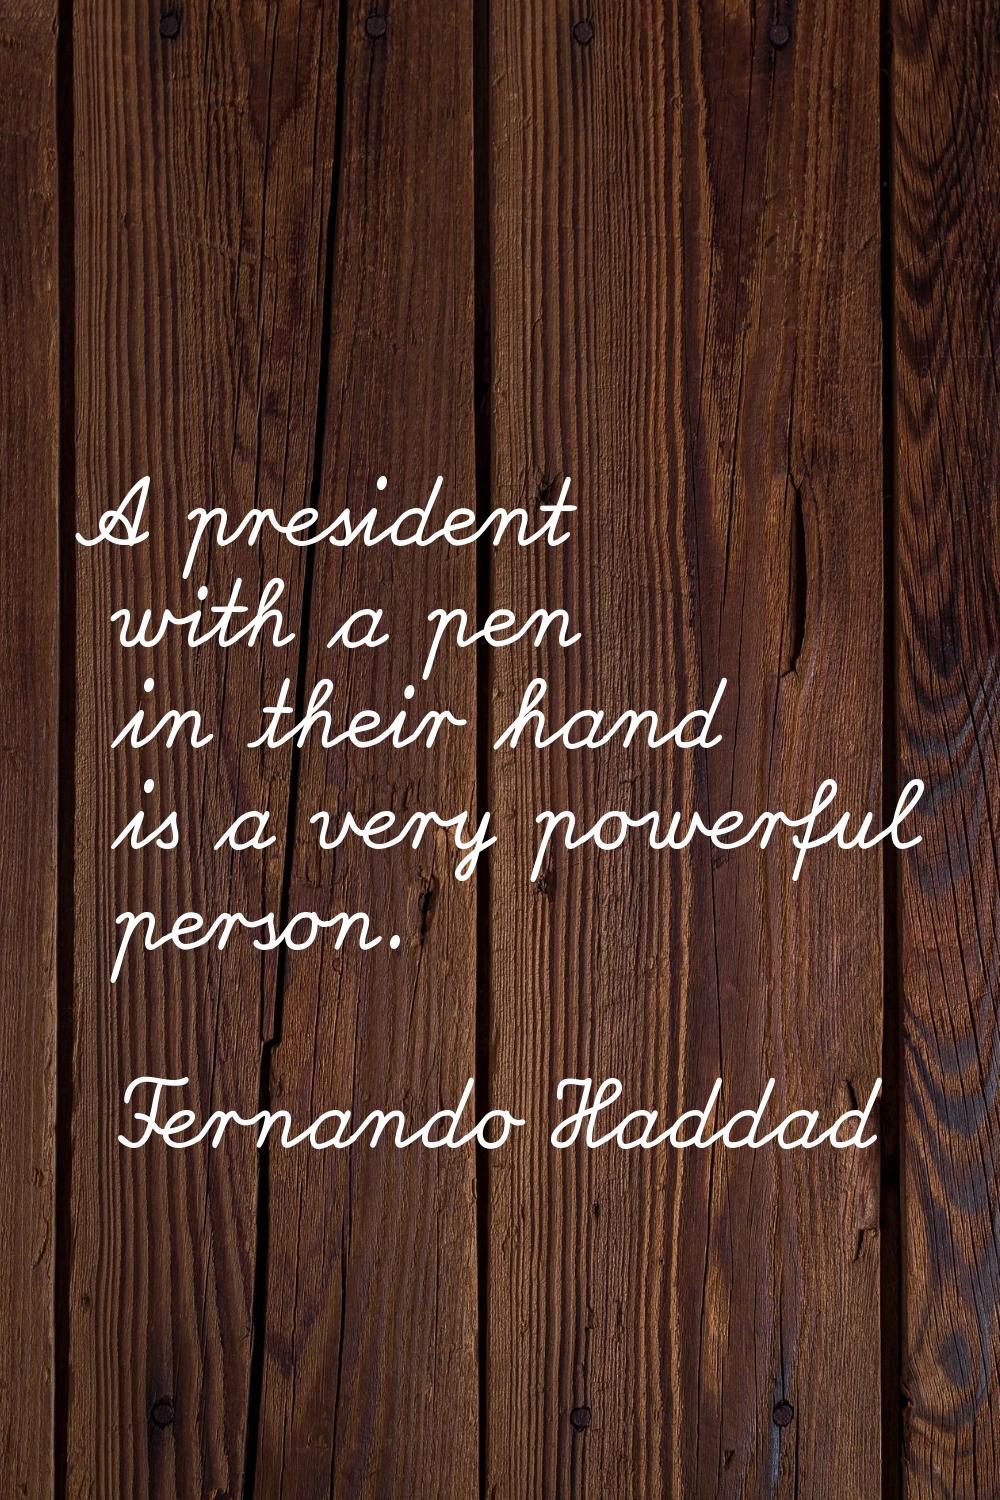 A president with a pen in their hand is a very powerful person.